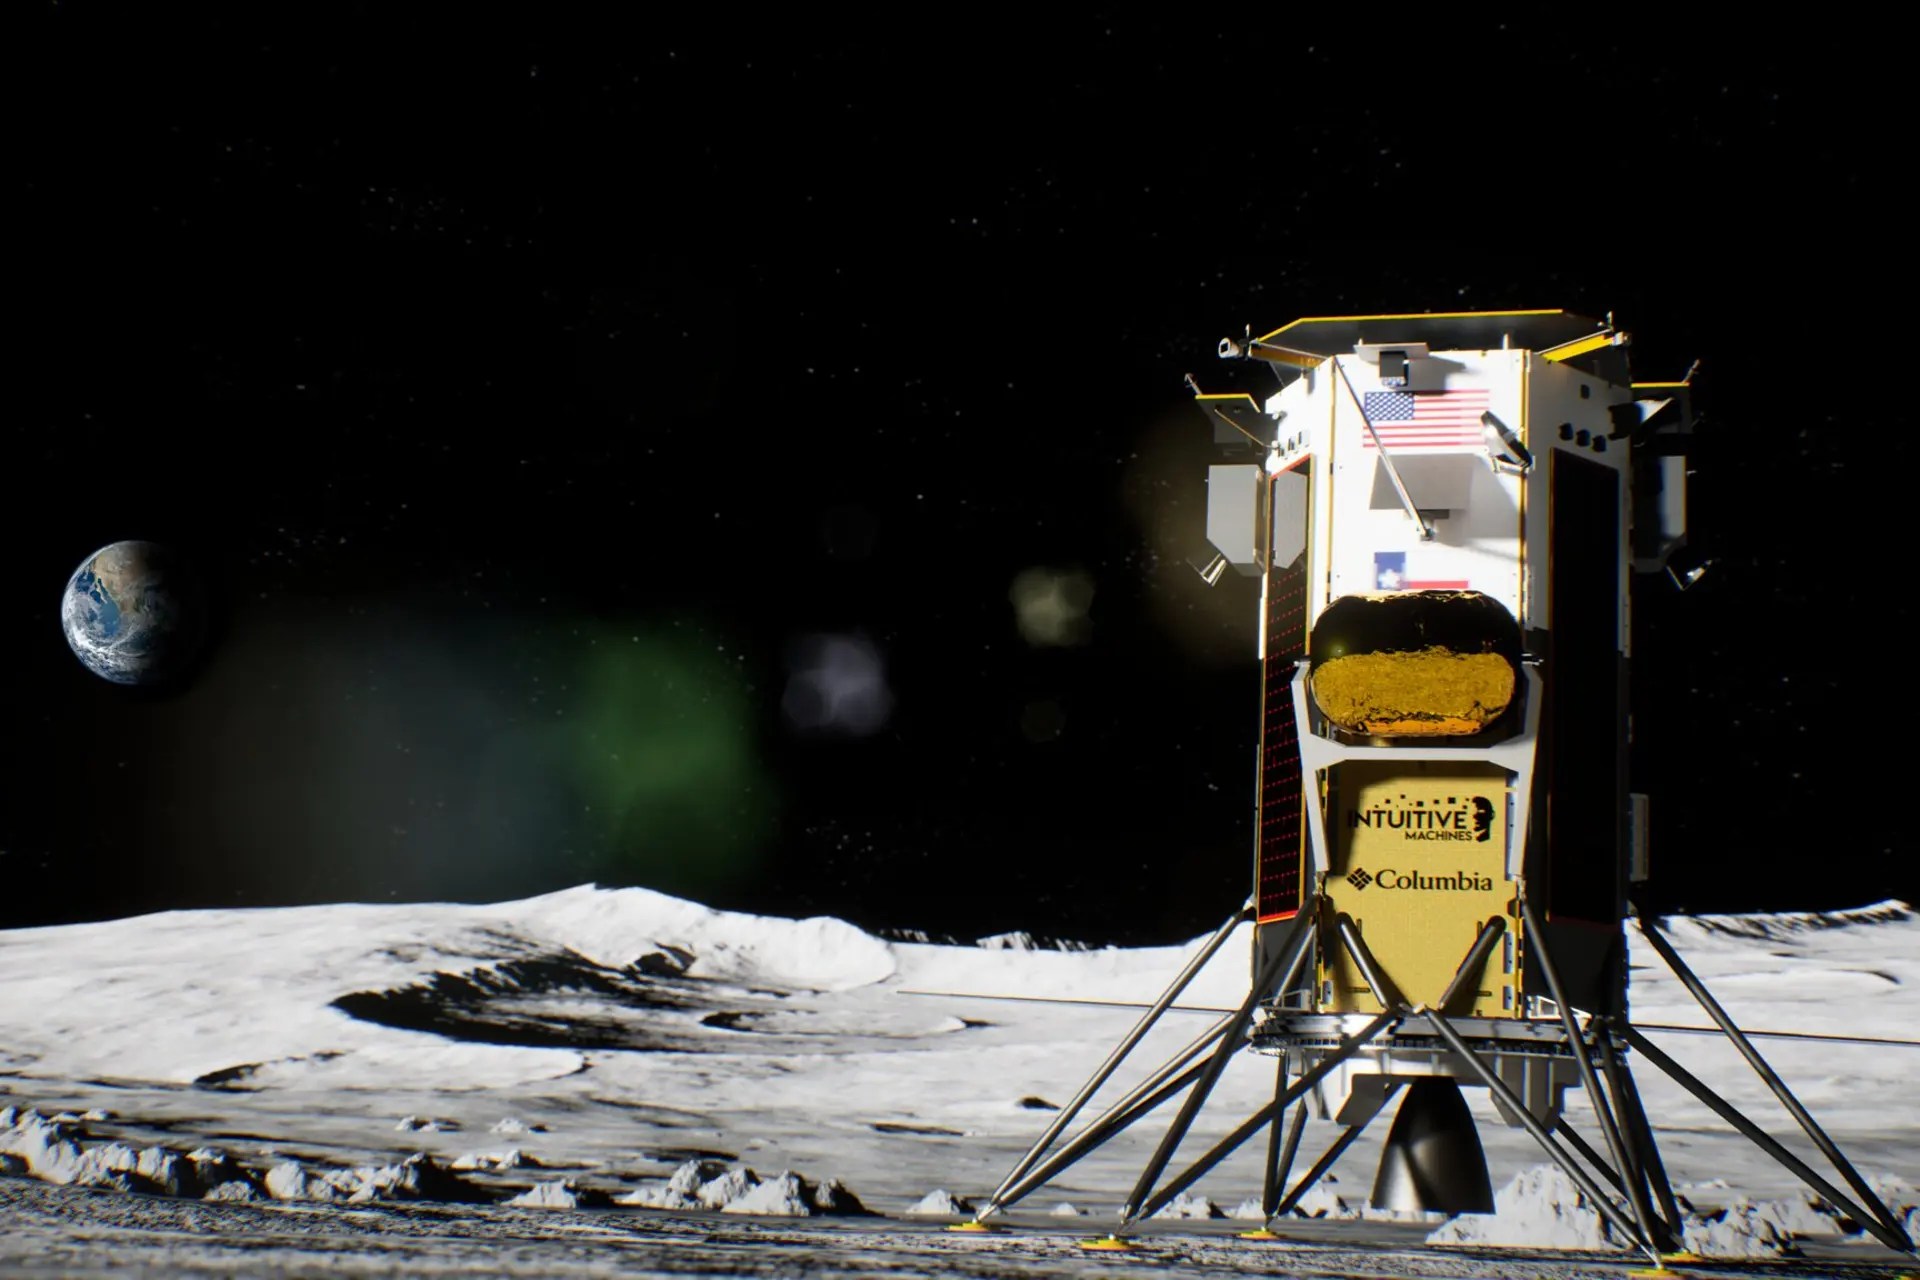 An artist’s rendition of Odie on the moon. CREDIT: Intuitive Machines